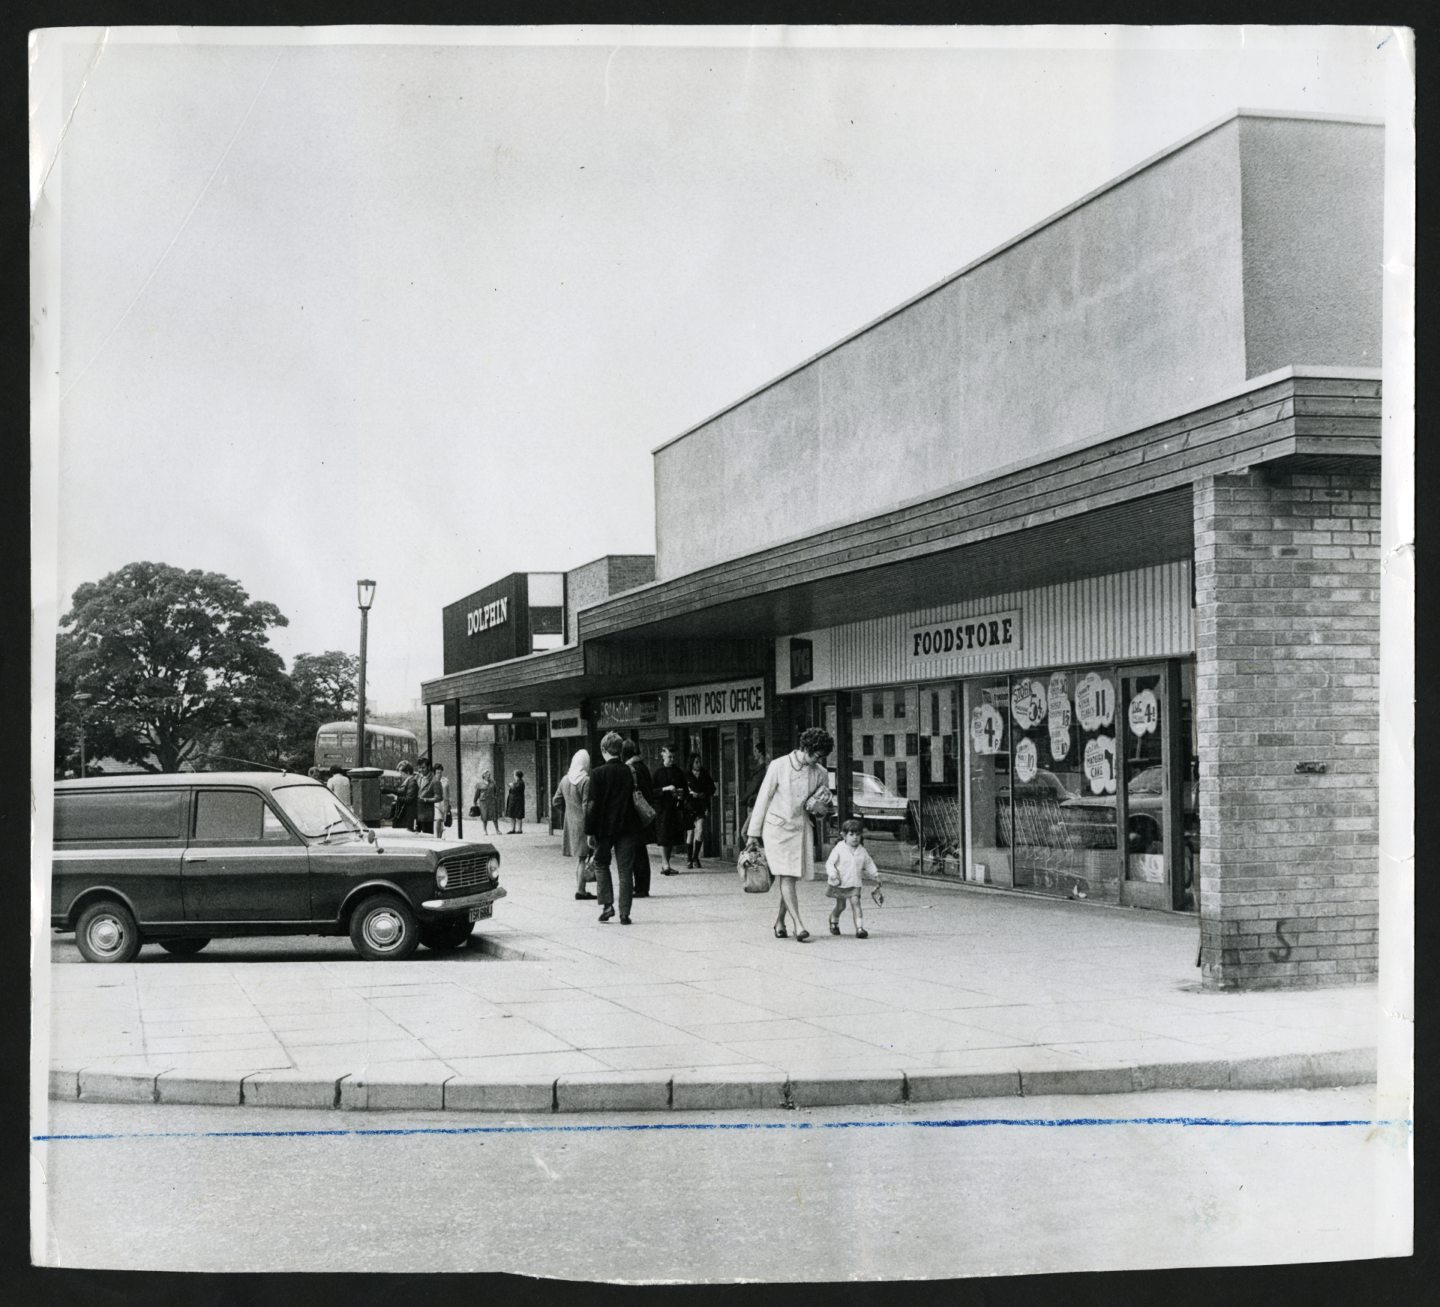 this 1971 image shows the VG store alongside the Fintry Post Office and the Dolphin Bar.